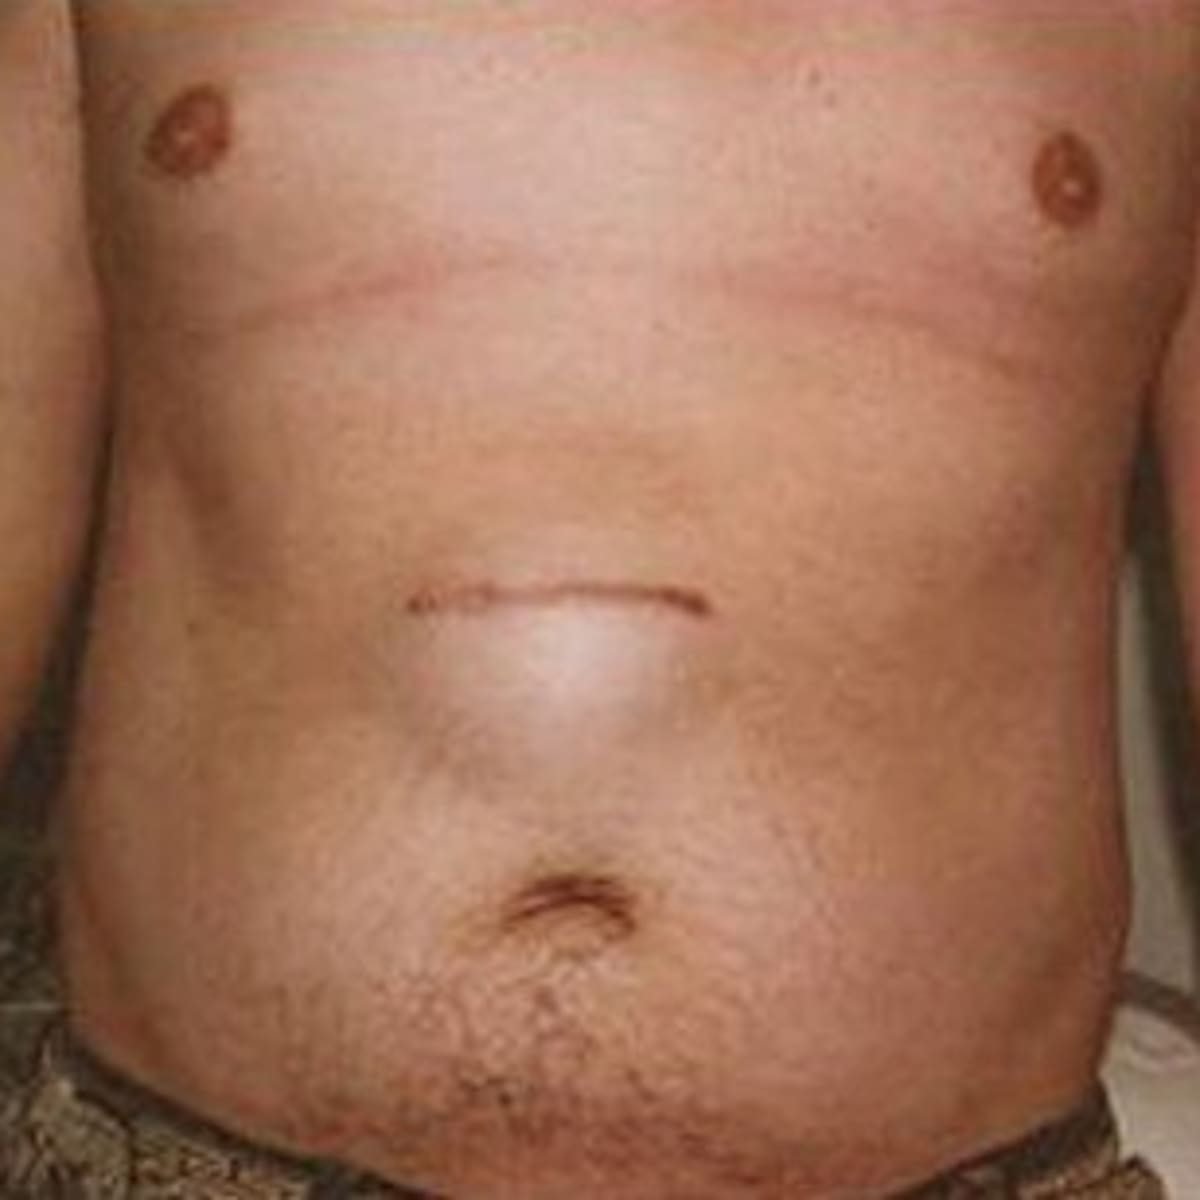 Pictures, Symptoms, Treatment & Causes of Epigastric Hernia - HubPages